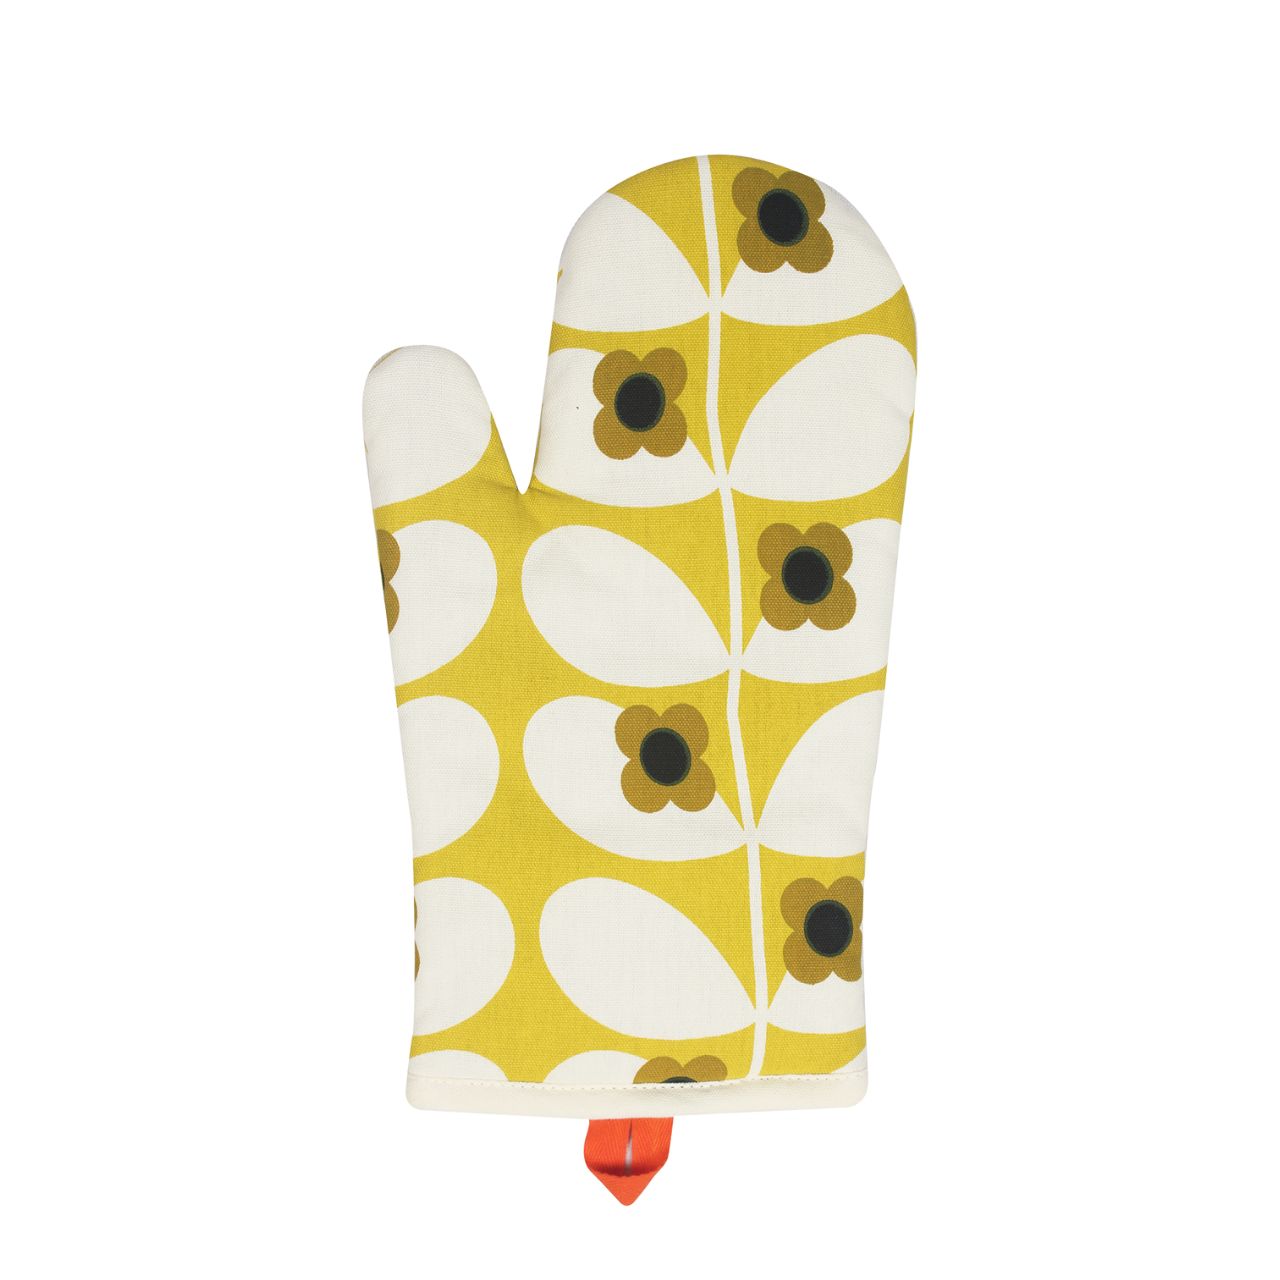 Tipperary Orla Kiely Oven Mitt - Wild Rose Stem Ochre  An Orla Kiely oven gauntlet with a beautiful Wild Rose Stem design in bright dandelion. Keep your hand safe from burns and scalds in the kitchen with the beautiful stem print oven glove from Orla Kiely.